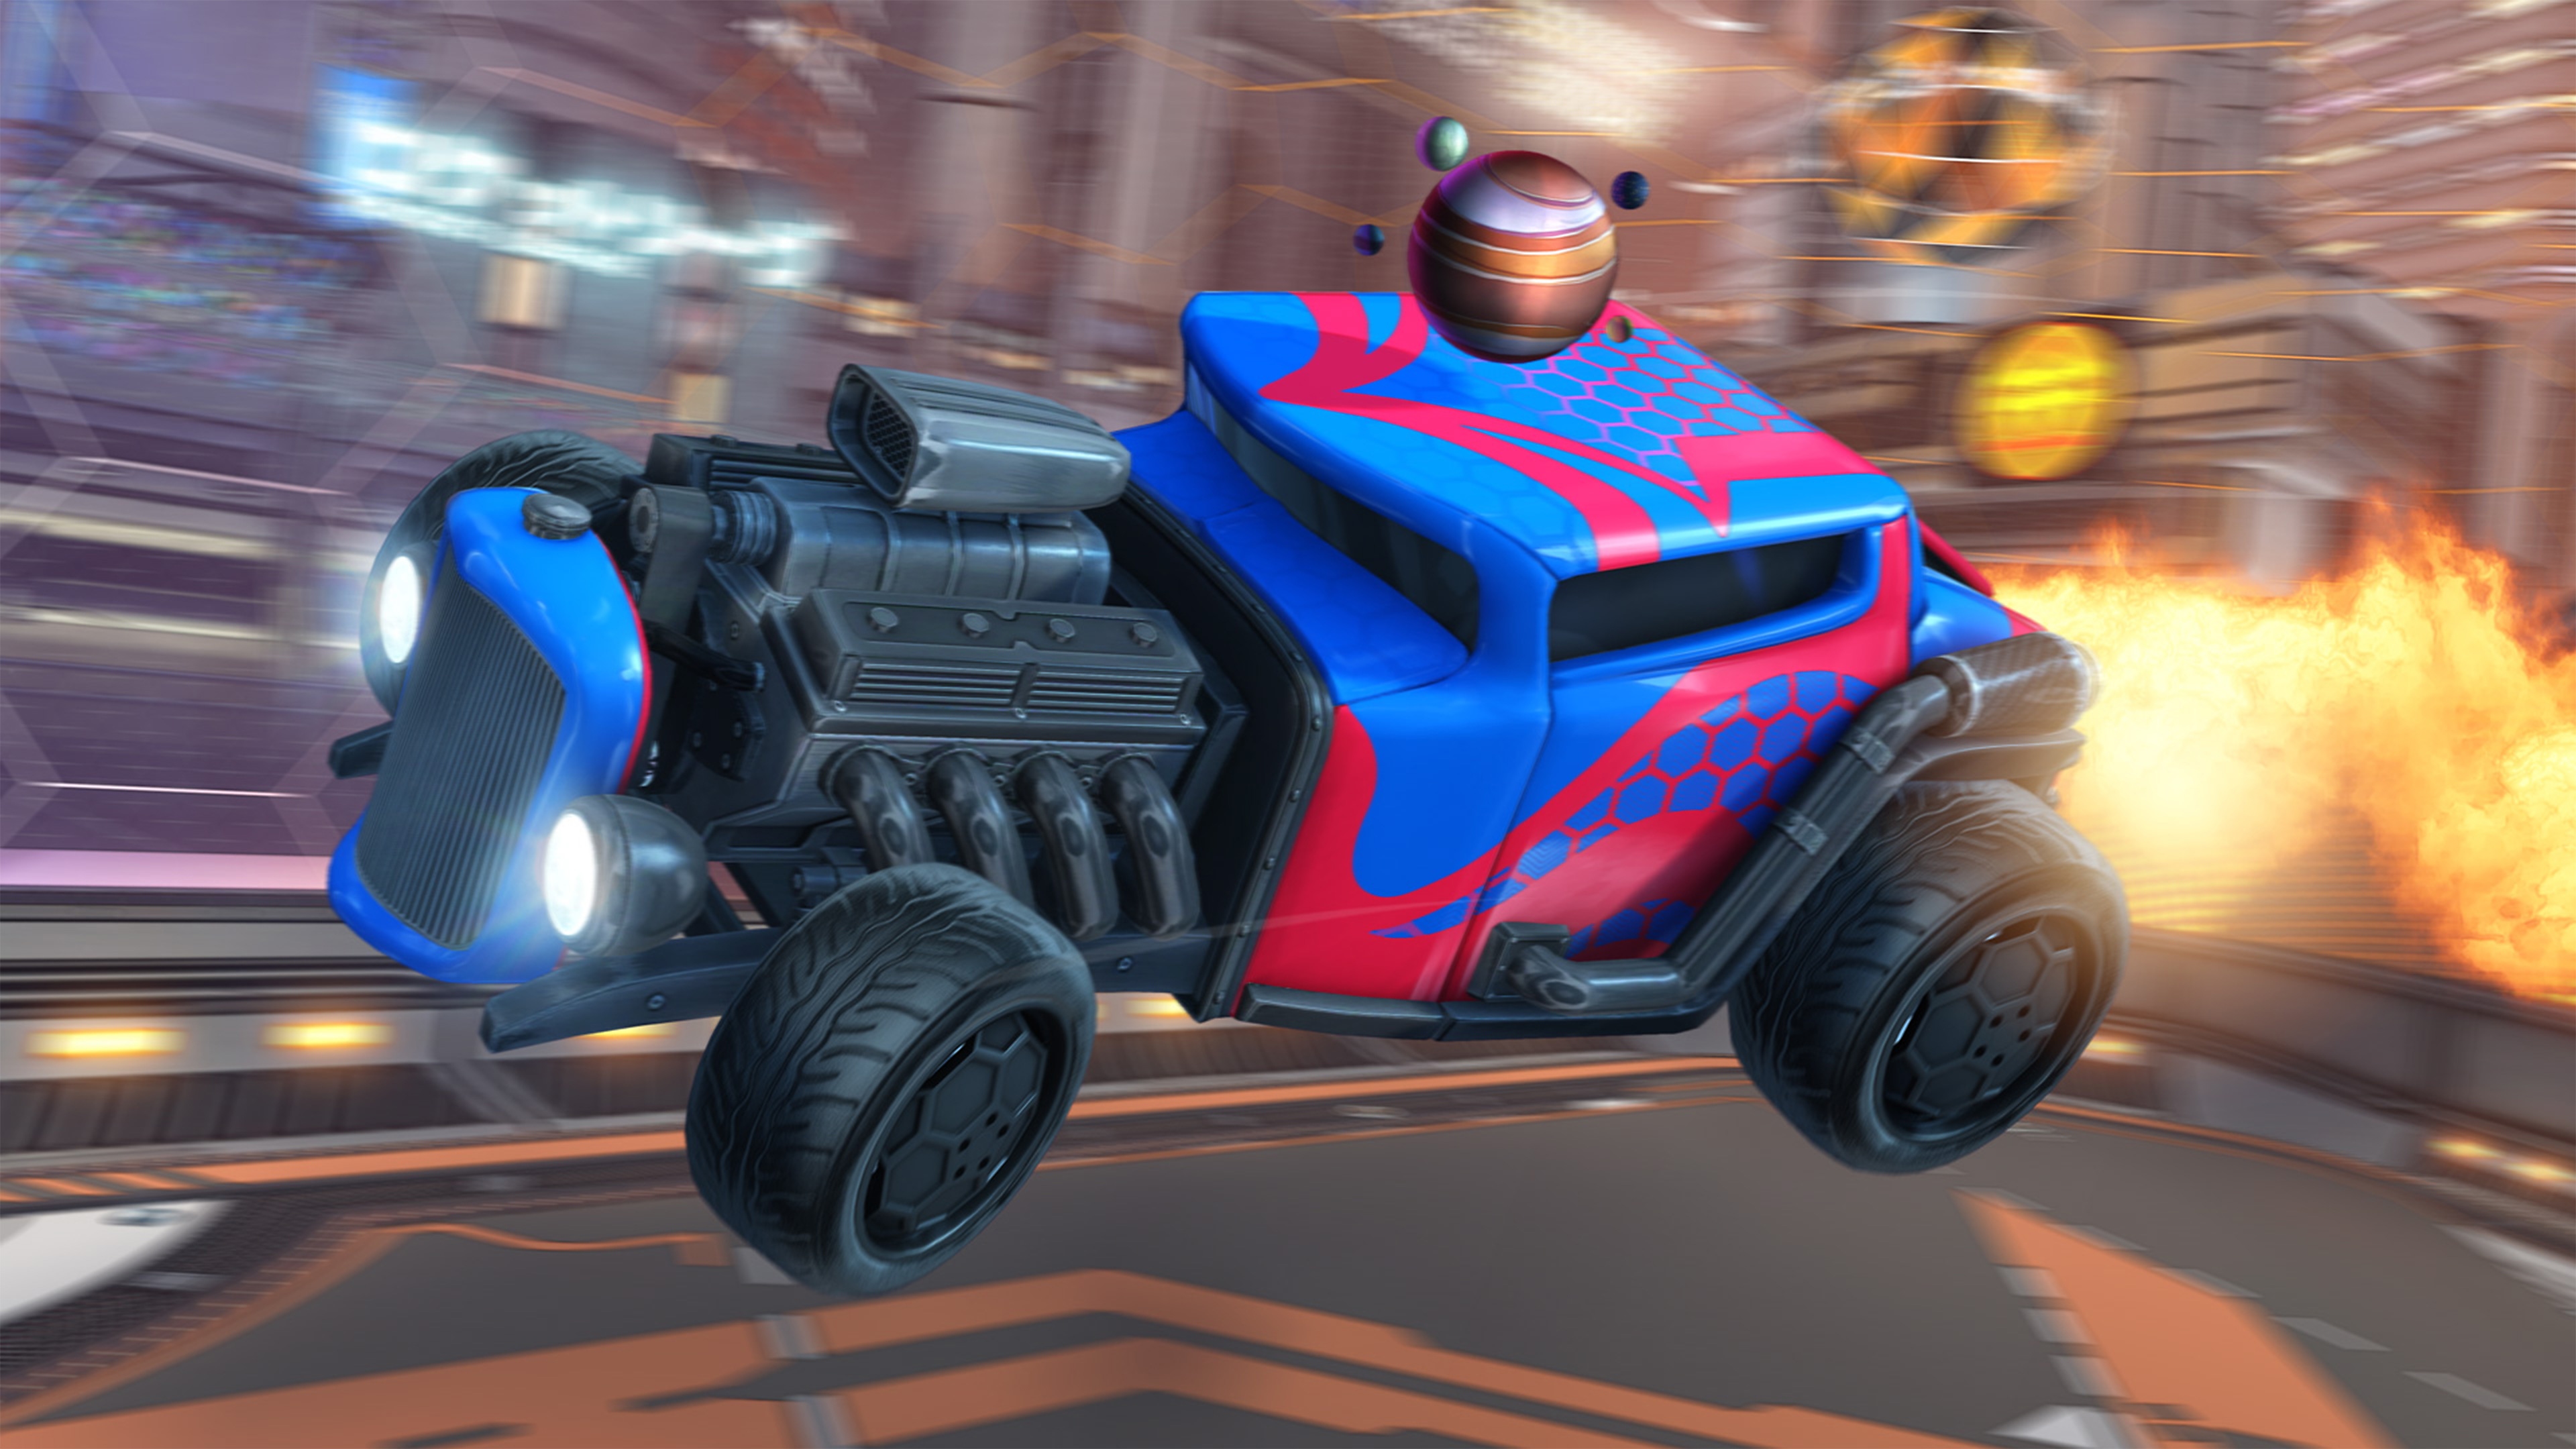 Rocket League screenshot showing hot-rod-style car with engine exposed and red and blue paintwork